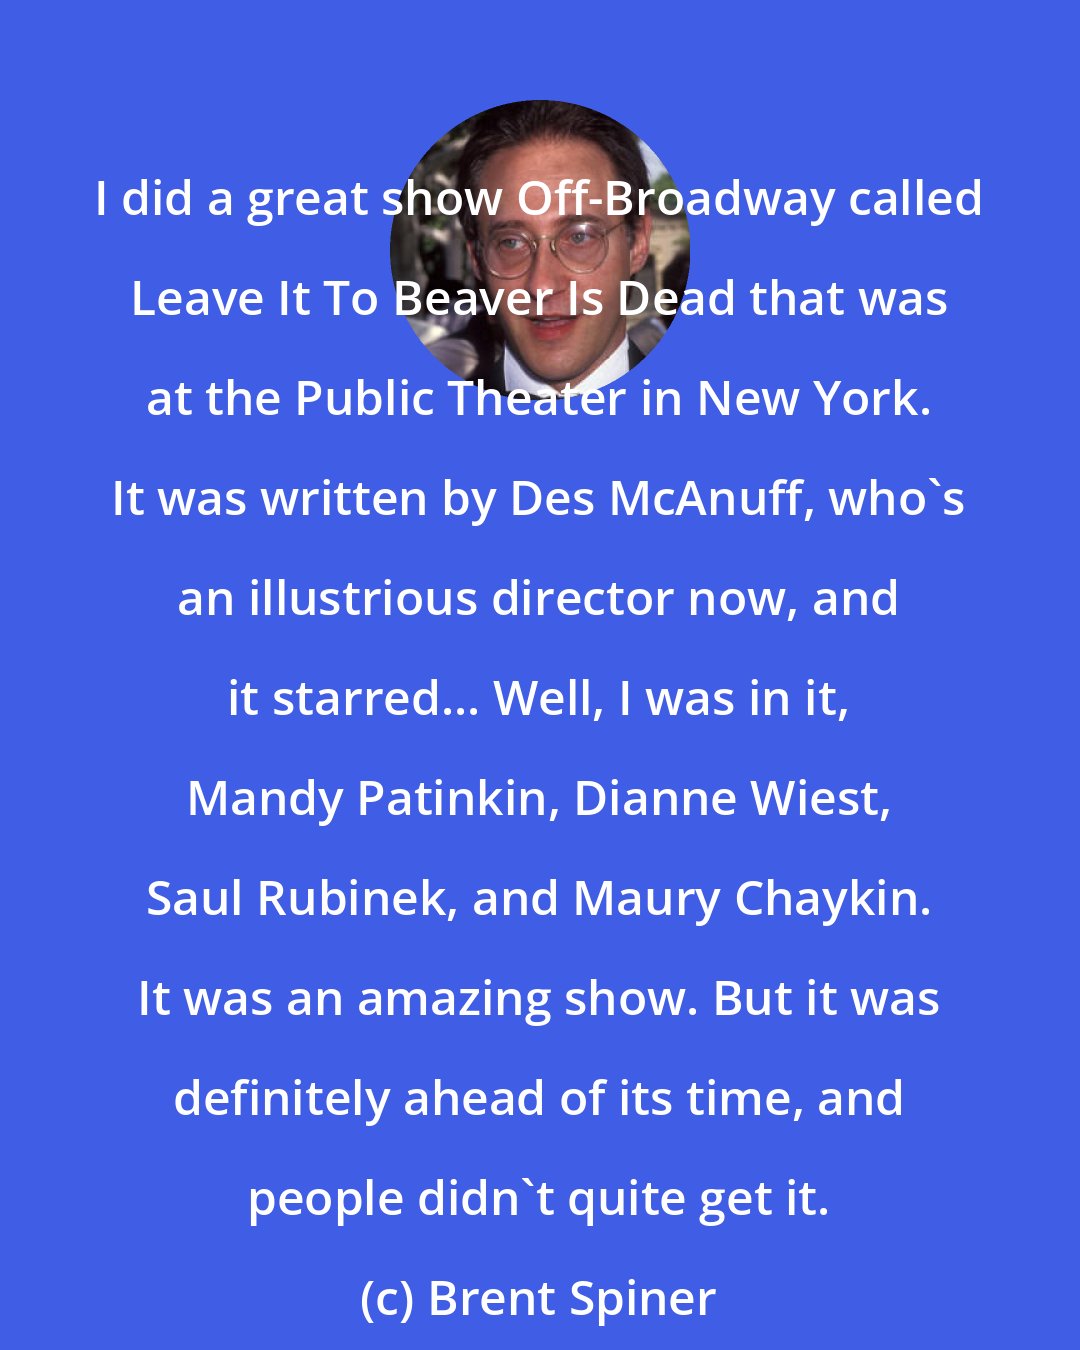 Brent Spiner: I did a great show Off-Broadway called Leave It To Beaver Is Dead that was at the Public Theater in New York. It was written by Des McAnuff, who's an illustrious director now, and it starred... Well, I was in it, Mandy Patinkin, Dianne Wiest, Saul Rubinek, and Maury Chaykin. It was an amazing show. But it was definitely ahead of its time, and people didn't quite get it.